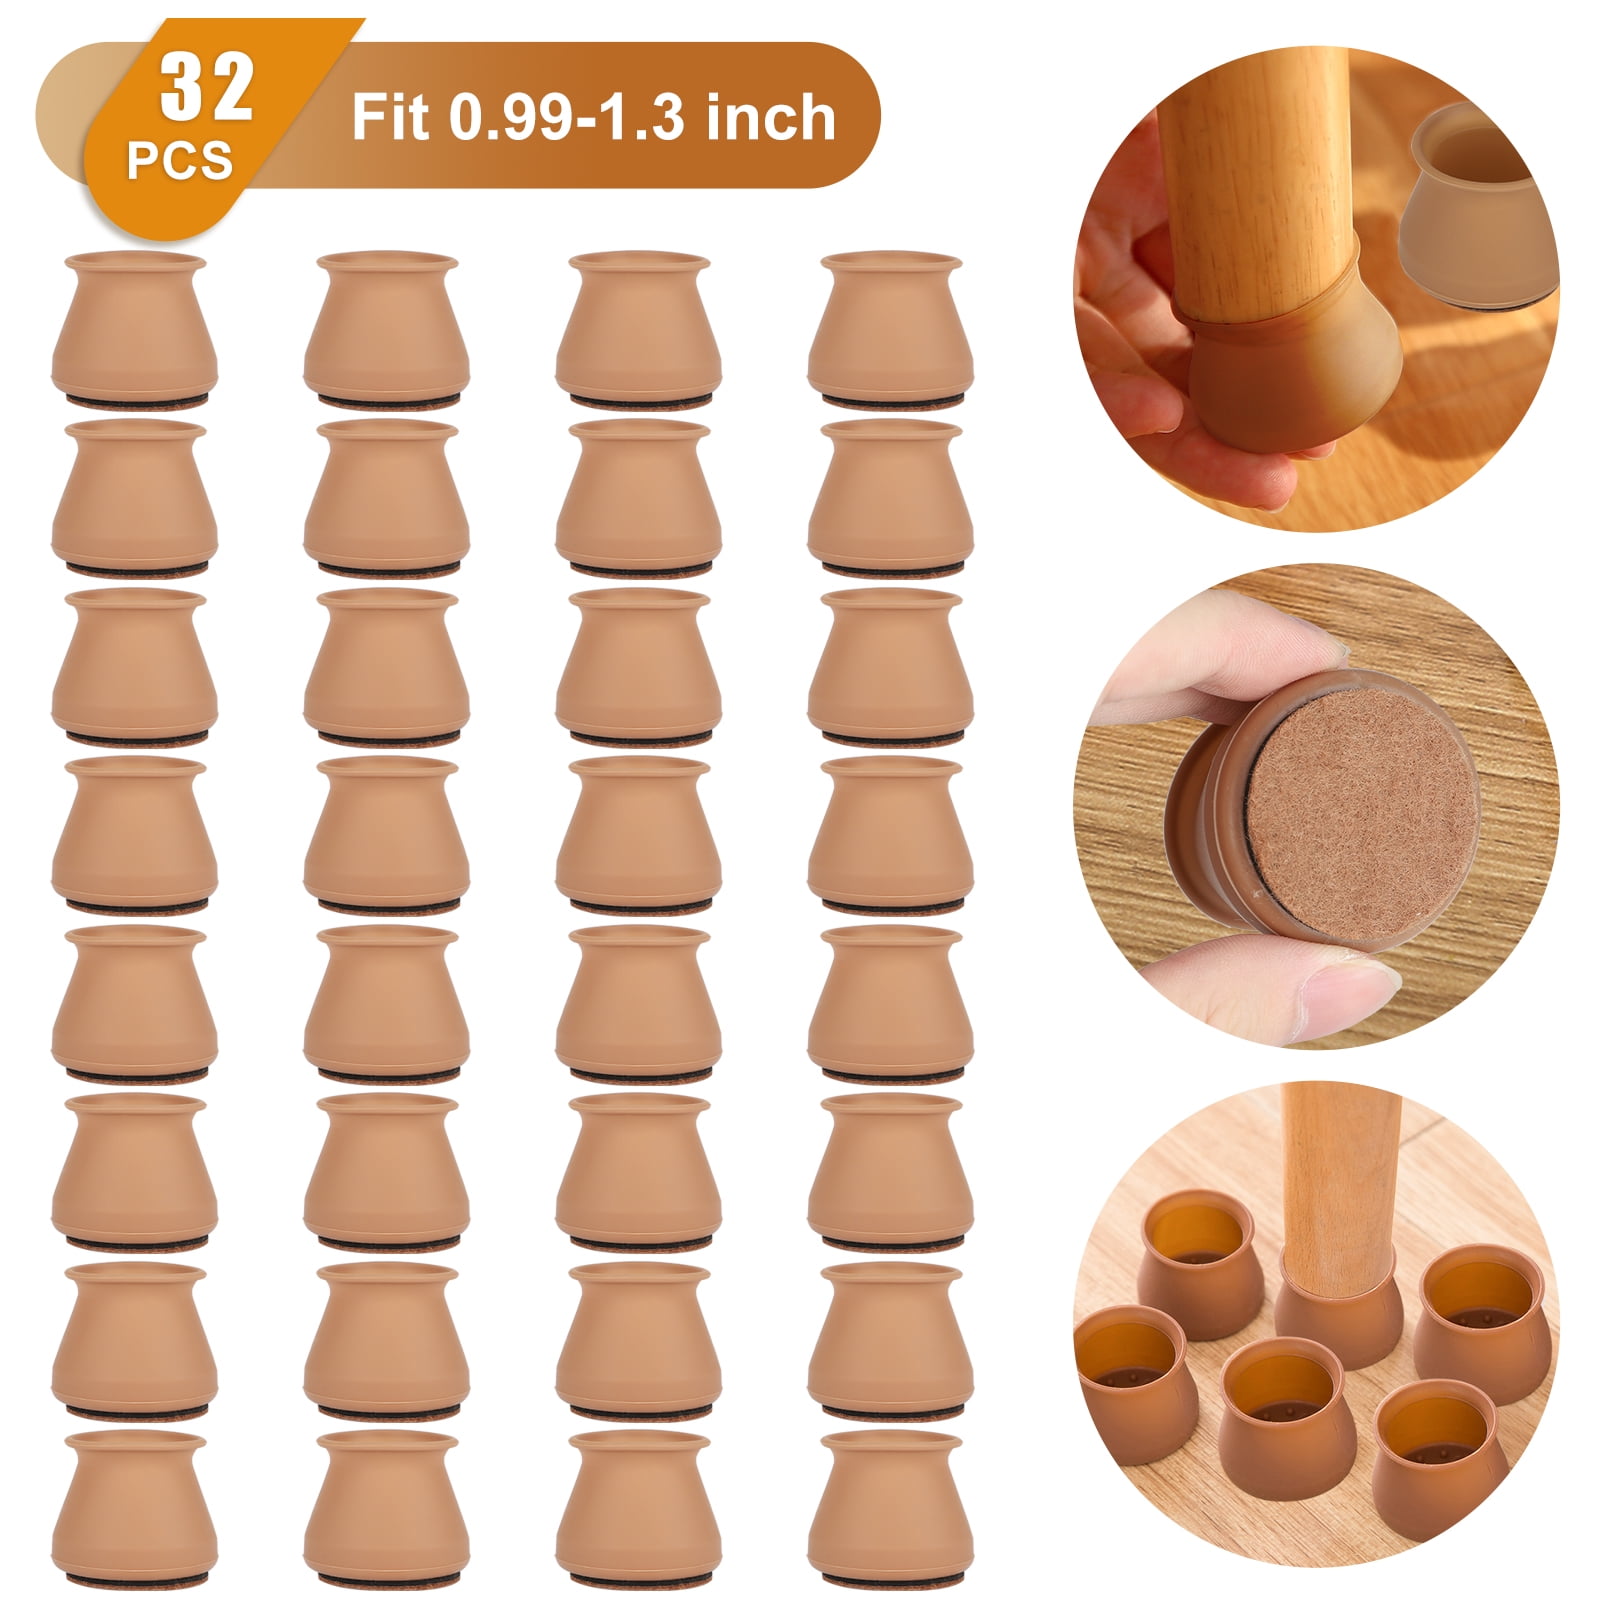 32PCS Chair Leg Cover Floor Protecors for Hardwood Floor,Silicone Furniture Leg Feet Protection Cover with Felt Pads,Chair Leg Caps Prevent Scratches Fit Round Square Black